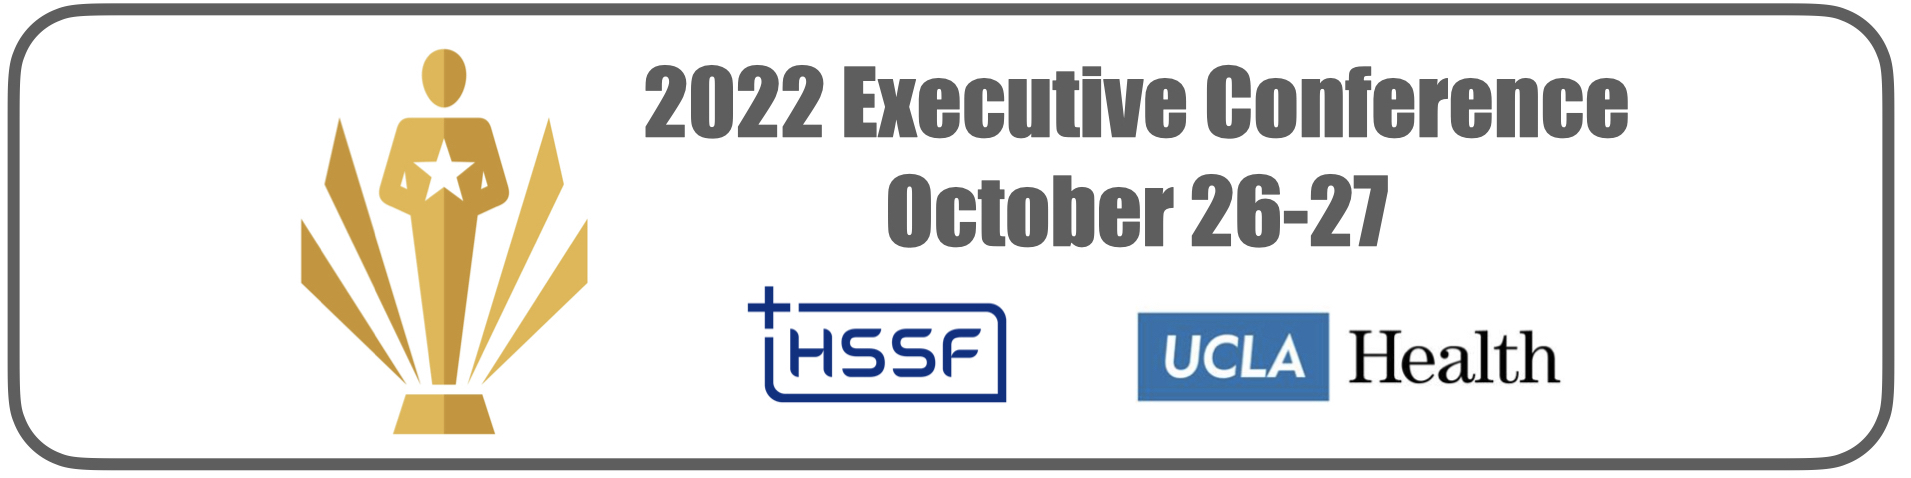 2022 HSSF Executive Conference